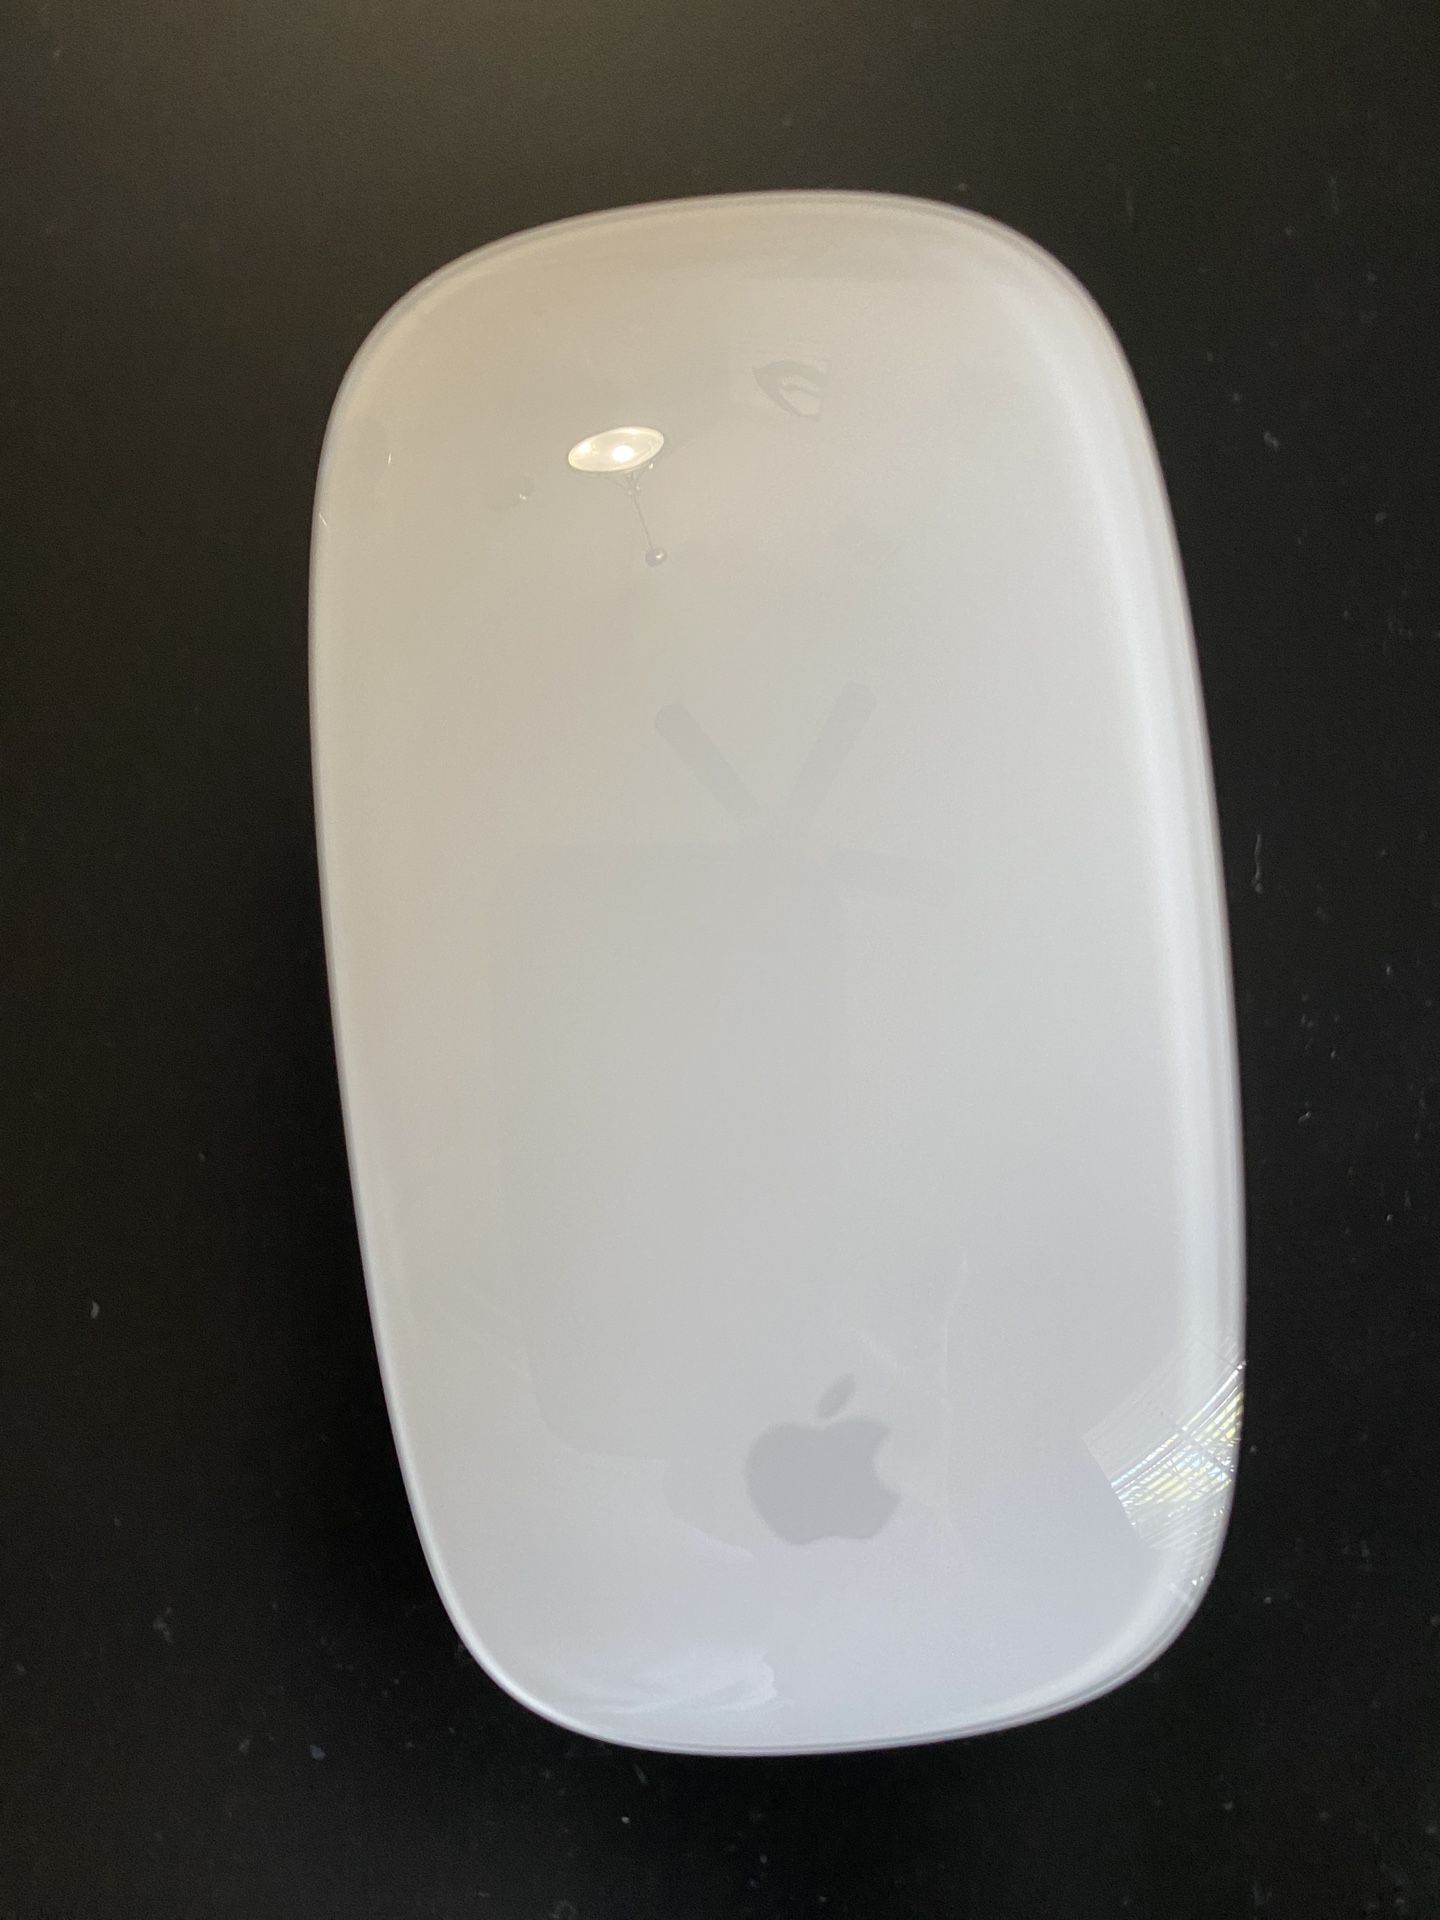 Apple Magic Mouse (Brand New)